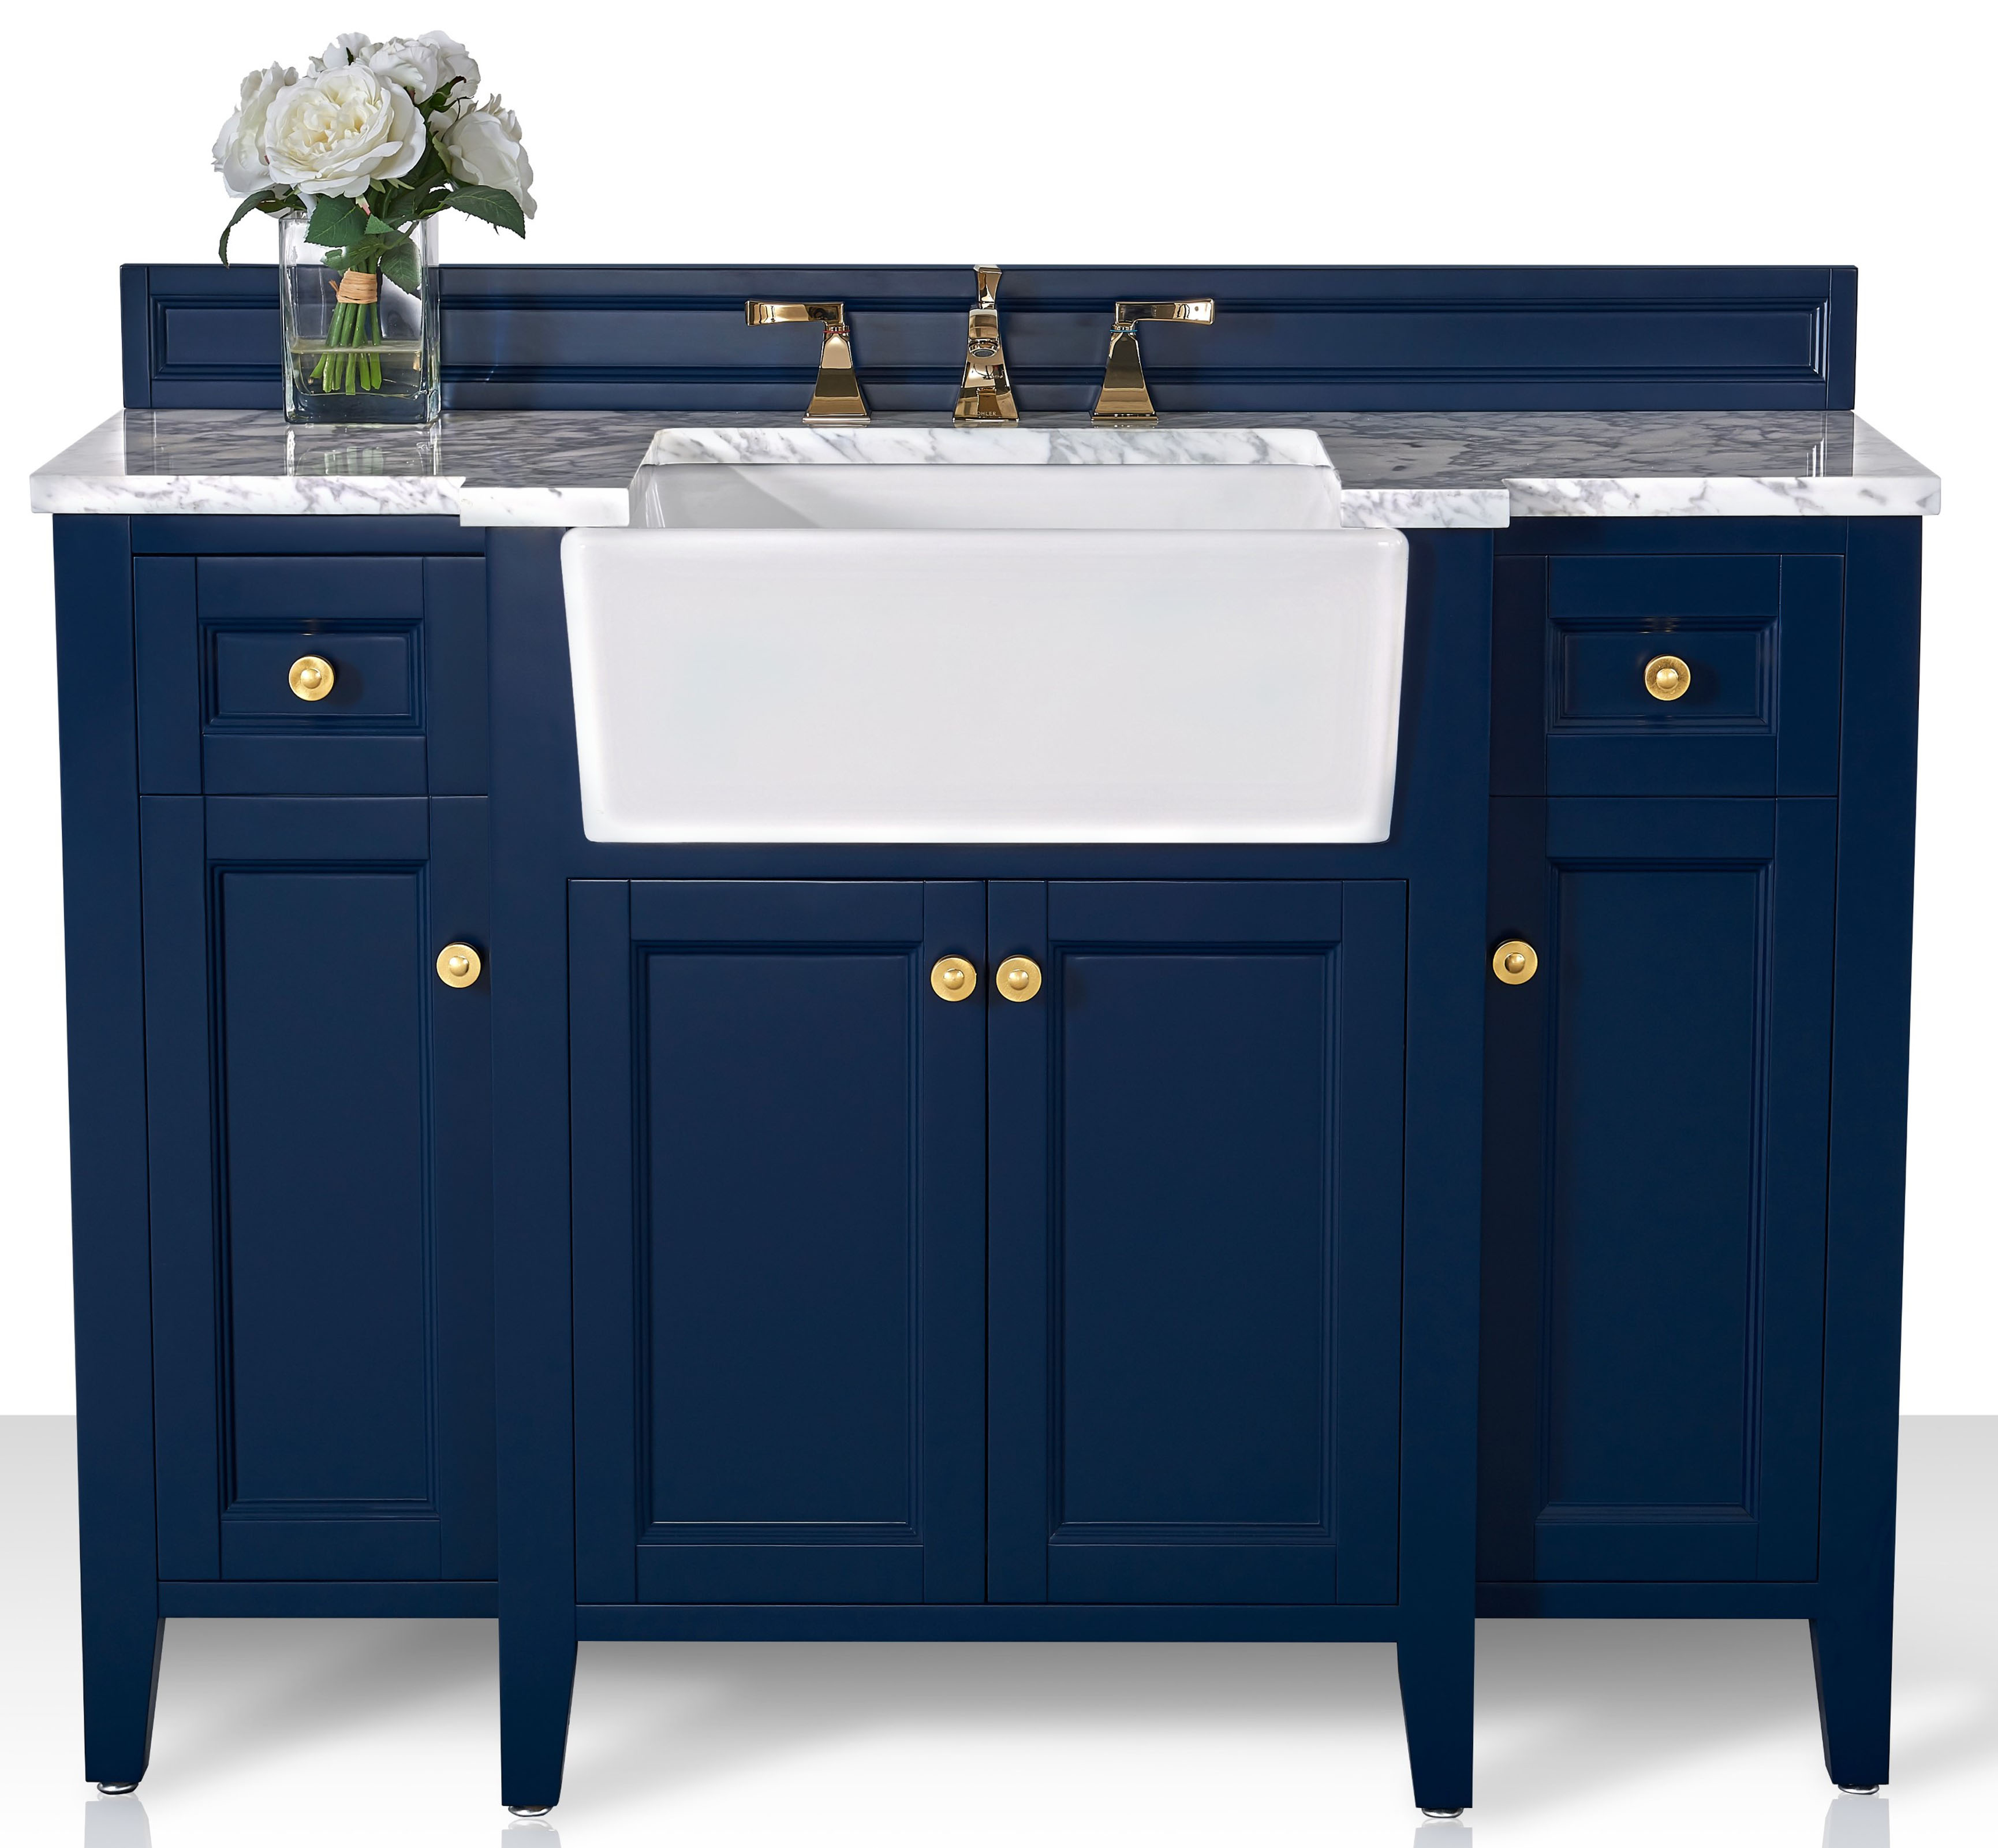 48" Bath Vanity Set in Heritage Blue with Italian Carrara White Marble Vanity Top and White Undermount Basin with Gold Hardware